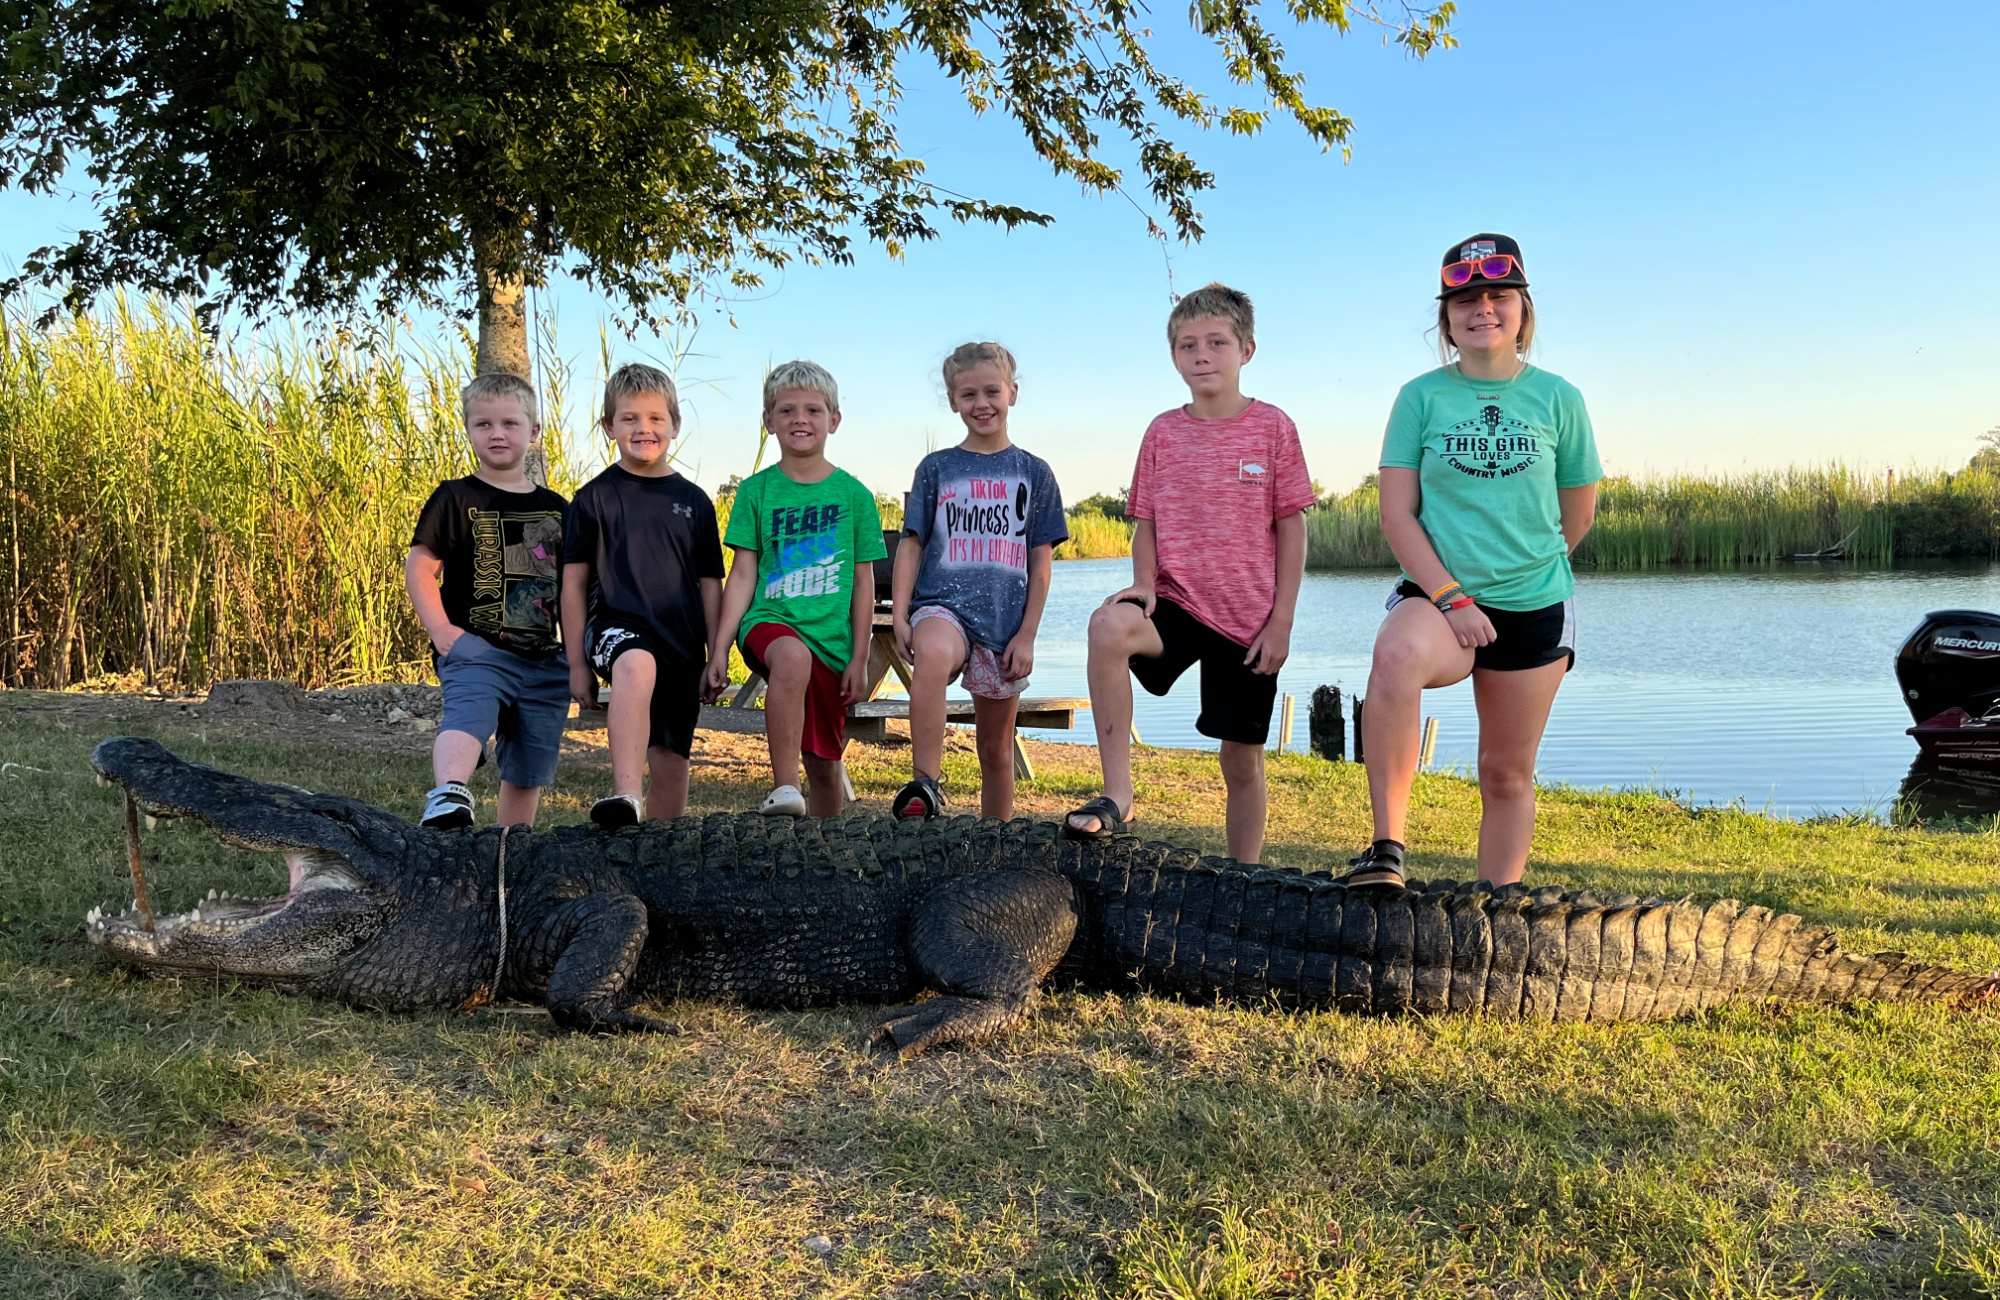 Giant 'Once in a Lifetime' 14-Foot Alligator Caught by Texas Hunters